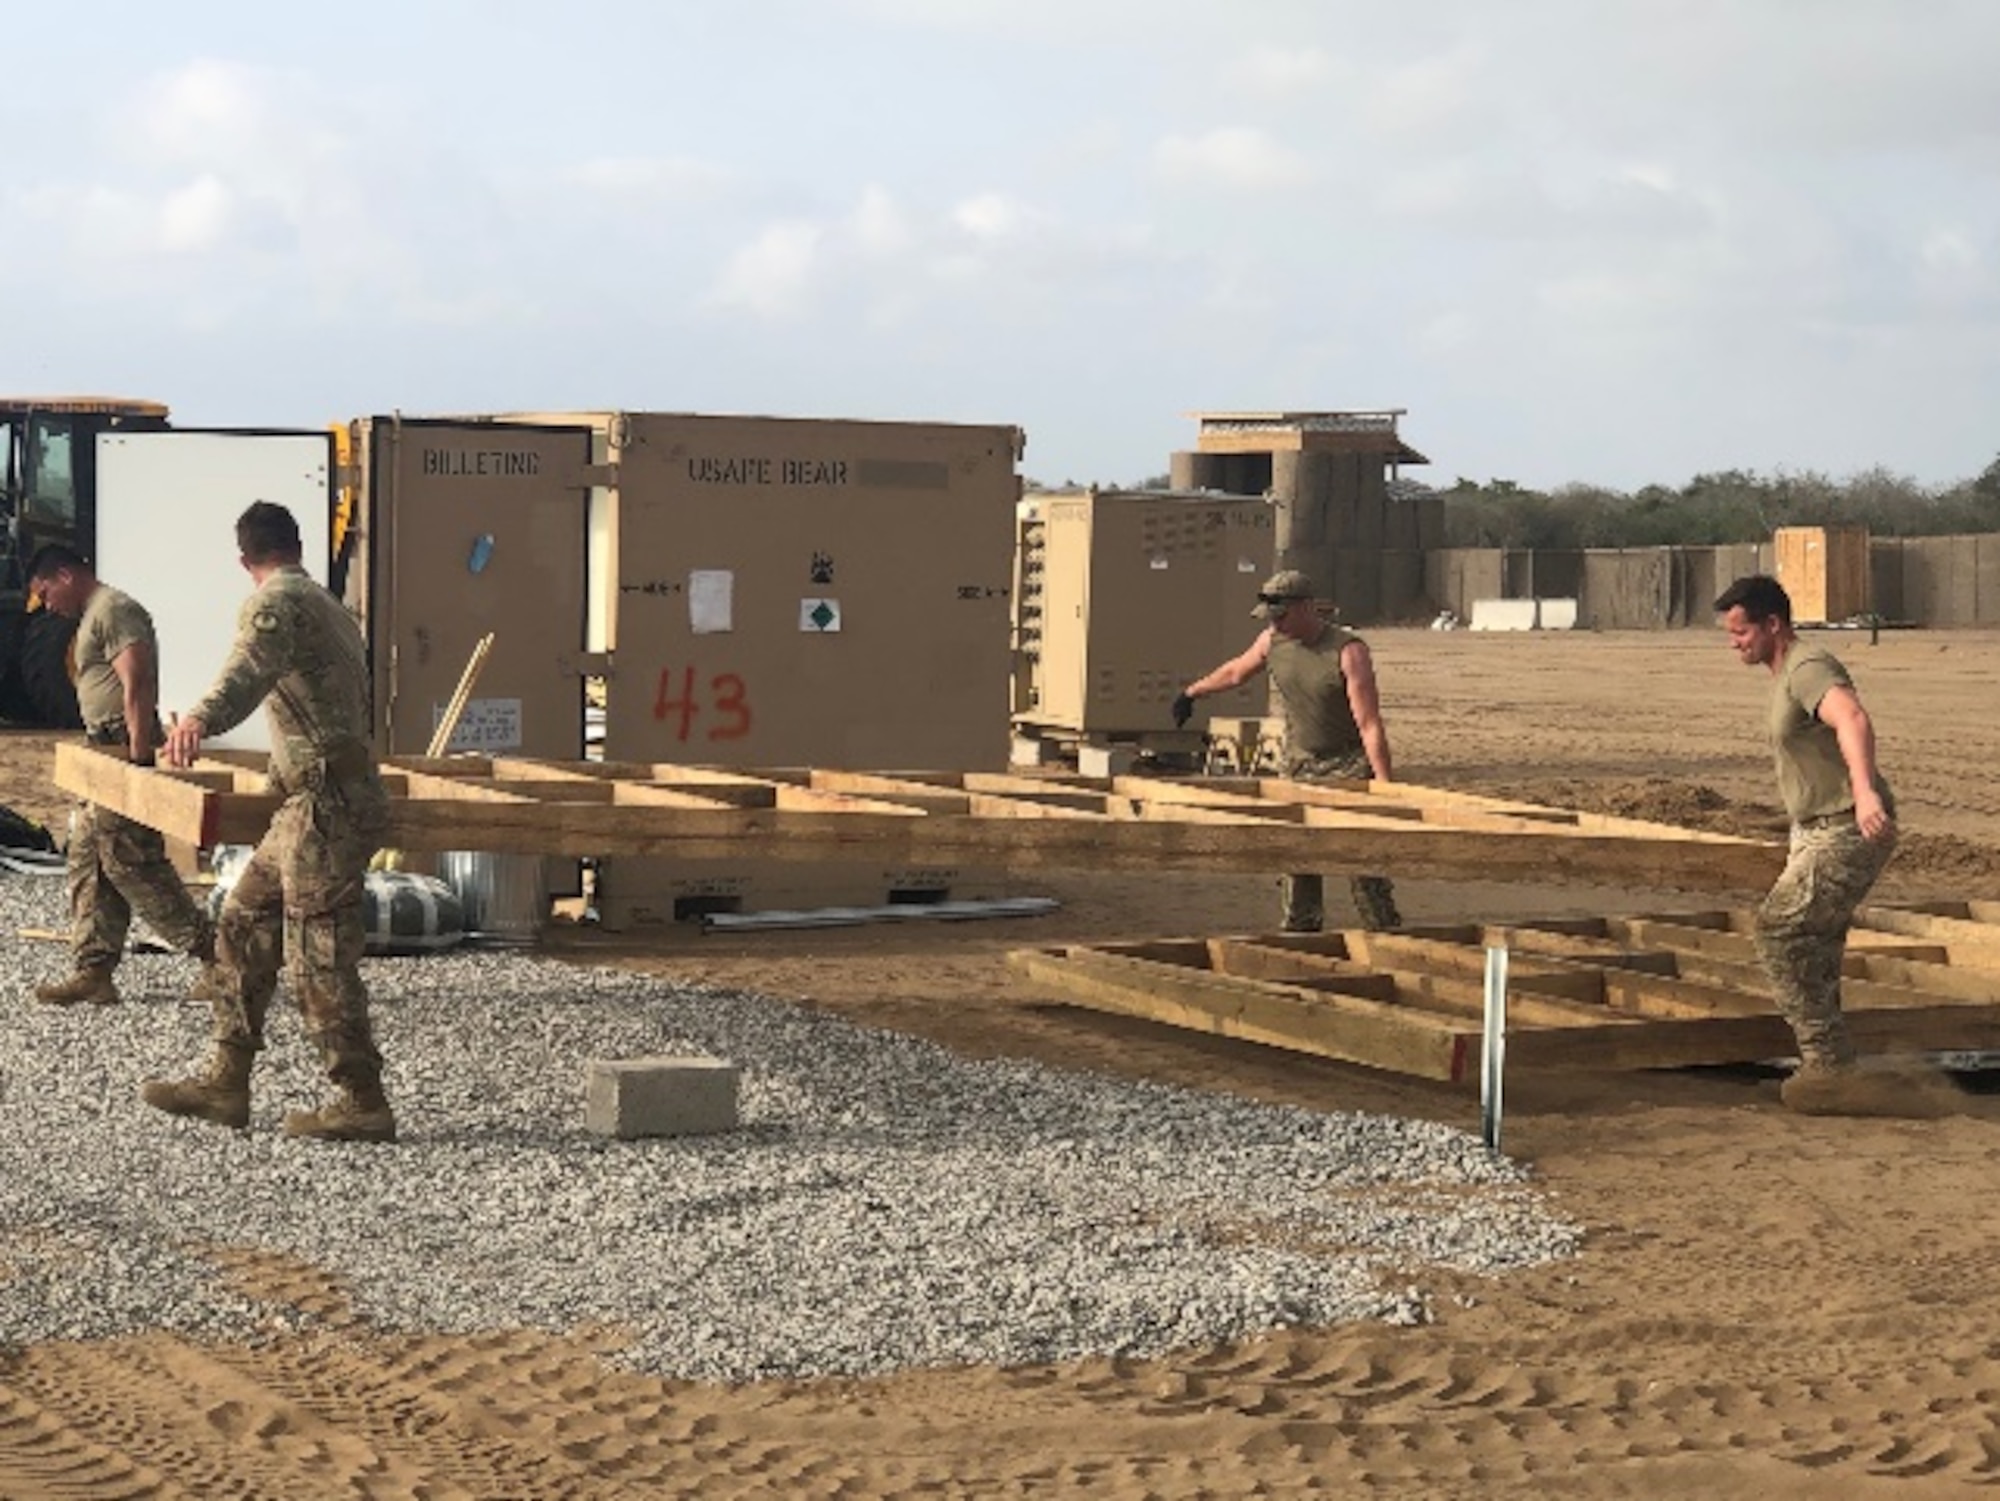 Airmen from the 435th Air Ground Operations Wing and 435th Air Expeditionary Wing execute a short-notice tasker to build-out a base capability in East Africa, Dec. 29, 2020. The teams assigned to the 435th AGOW and 435th AEW successfully executed their short-notice order as one team enabling multi-theater sustainment and support while maintaining partner capacity. (Courtesy photo)